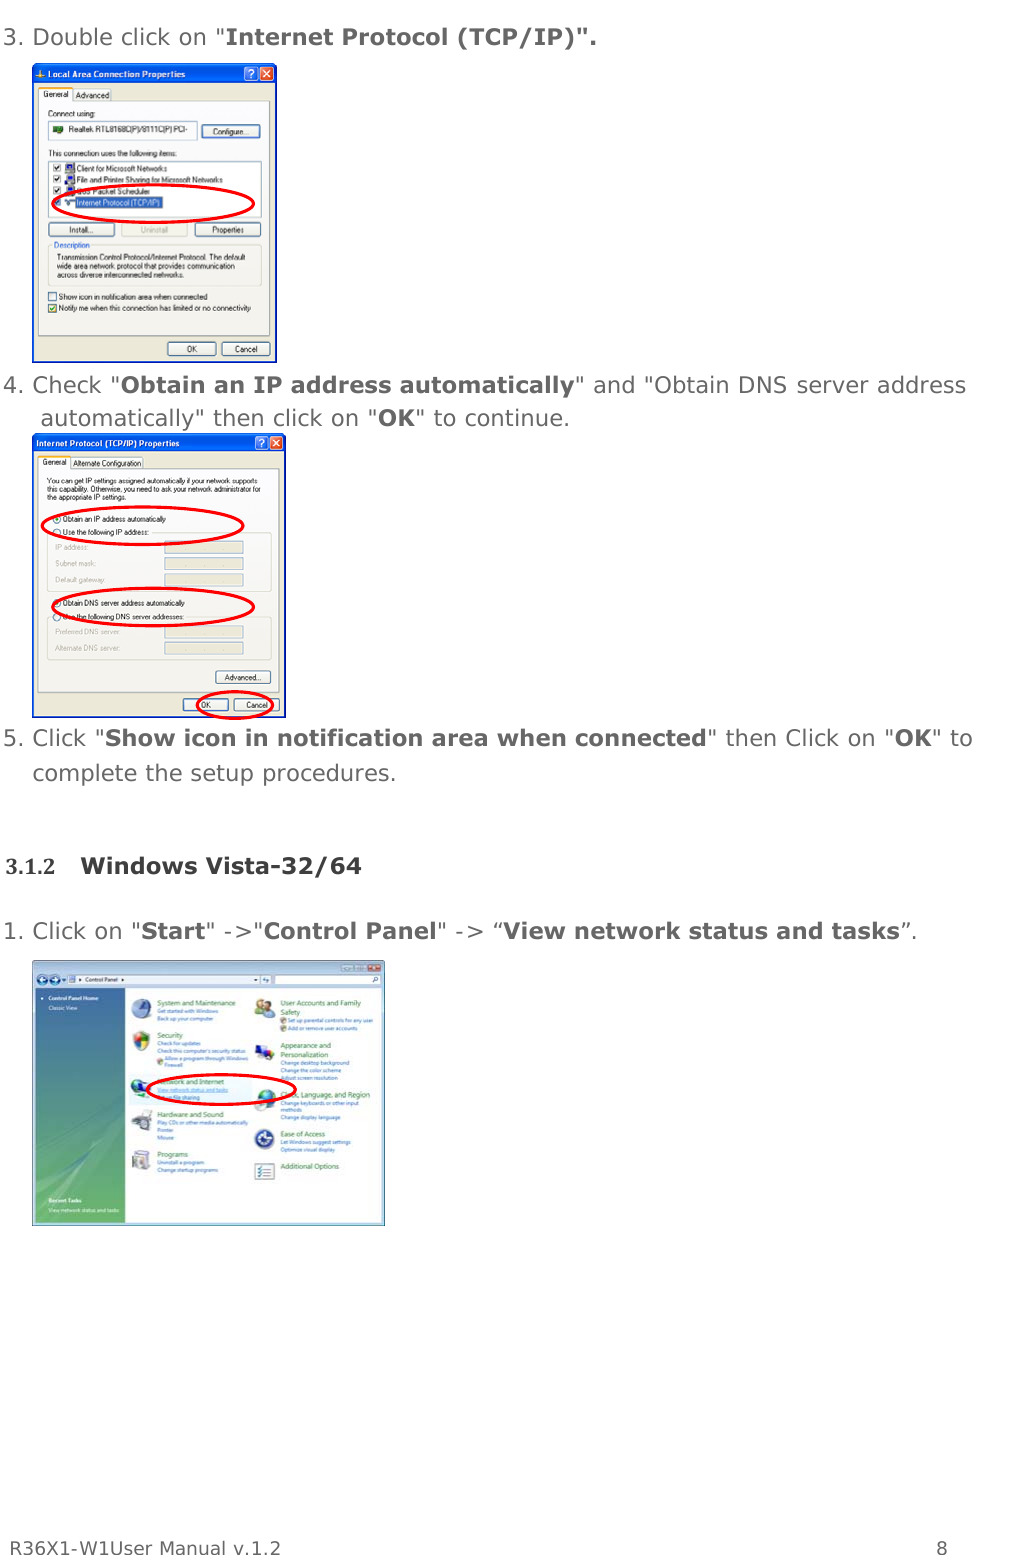           R36X1-W1User Manual v.1.2    8  3. Double click on &quot;Internet Protocol (TCP/IP)&quot;.  4. Check &quot;Obtain an IP address automatically&quot; and &quot;Obtain DNS server address automatically&quot; then click on &quot;OK&quot; to continue.  5. Click &quot;Show icon in notification area when connected&quot; then Click on &quot;OK&quot; to complete the setup procedures.  3.1.2 Windows Vista-32/641. Click on &quot;Start&quot; -&gt;&quot;Control Panel&quot; -&gt; “View network status and tasks”.    